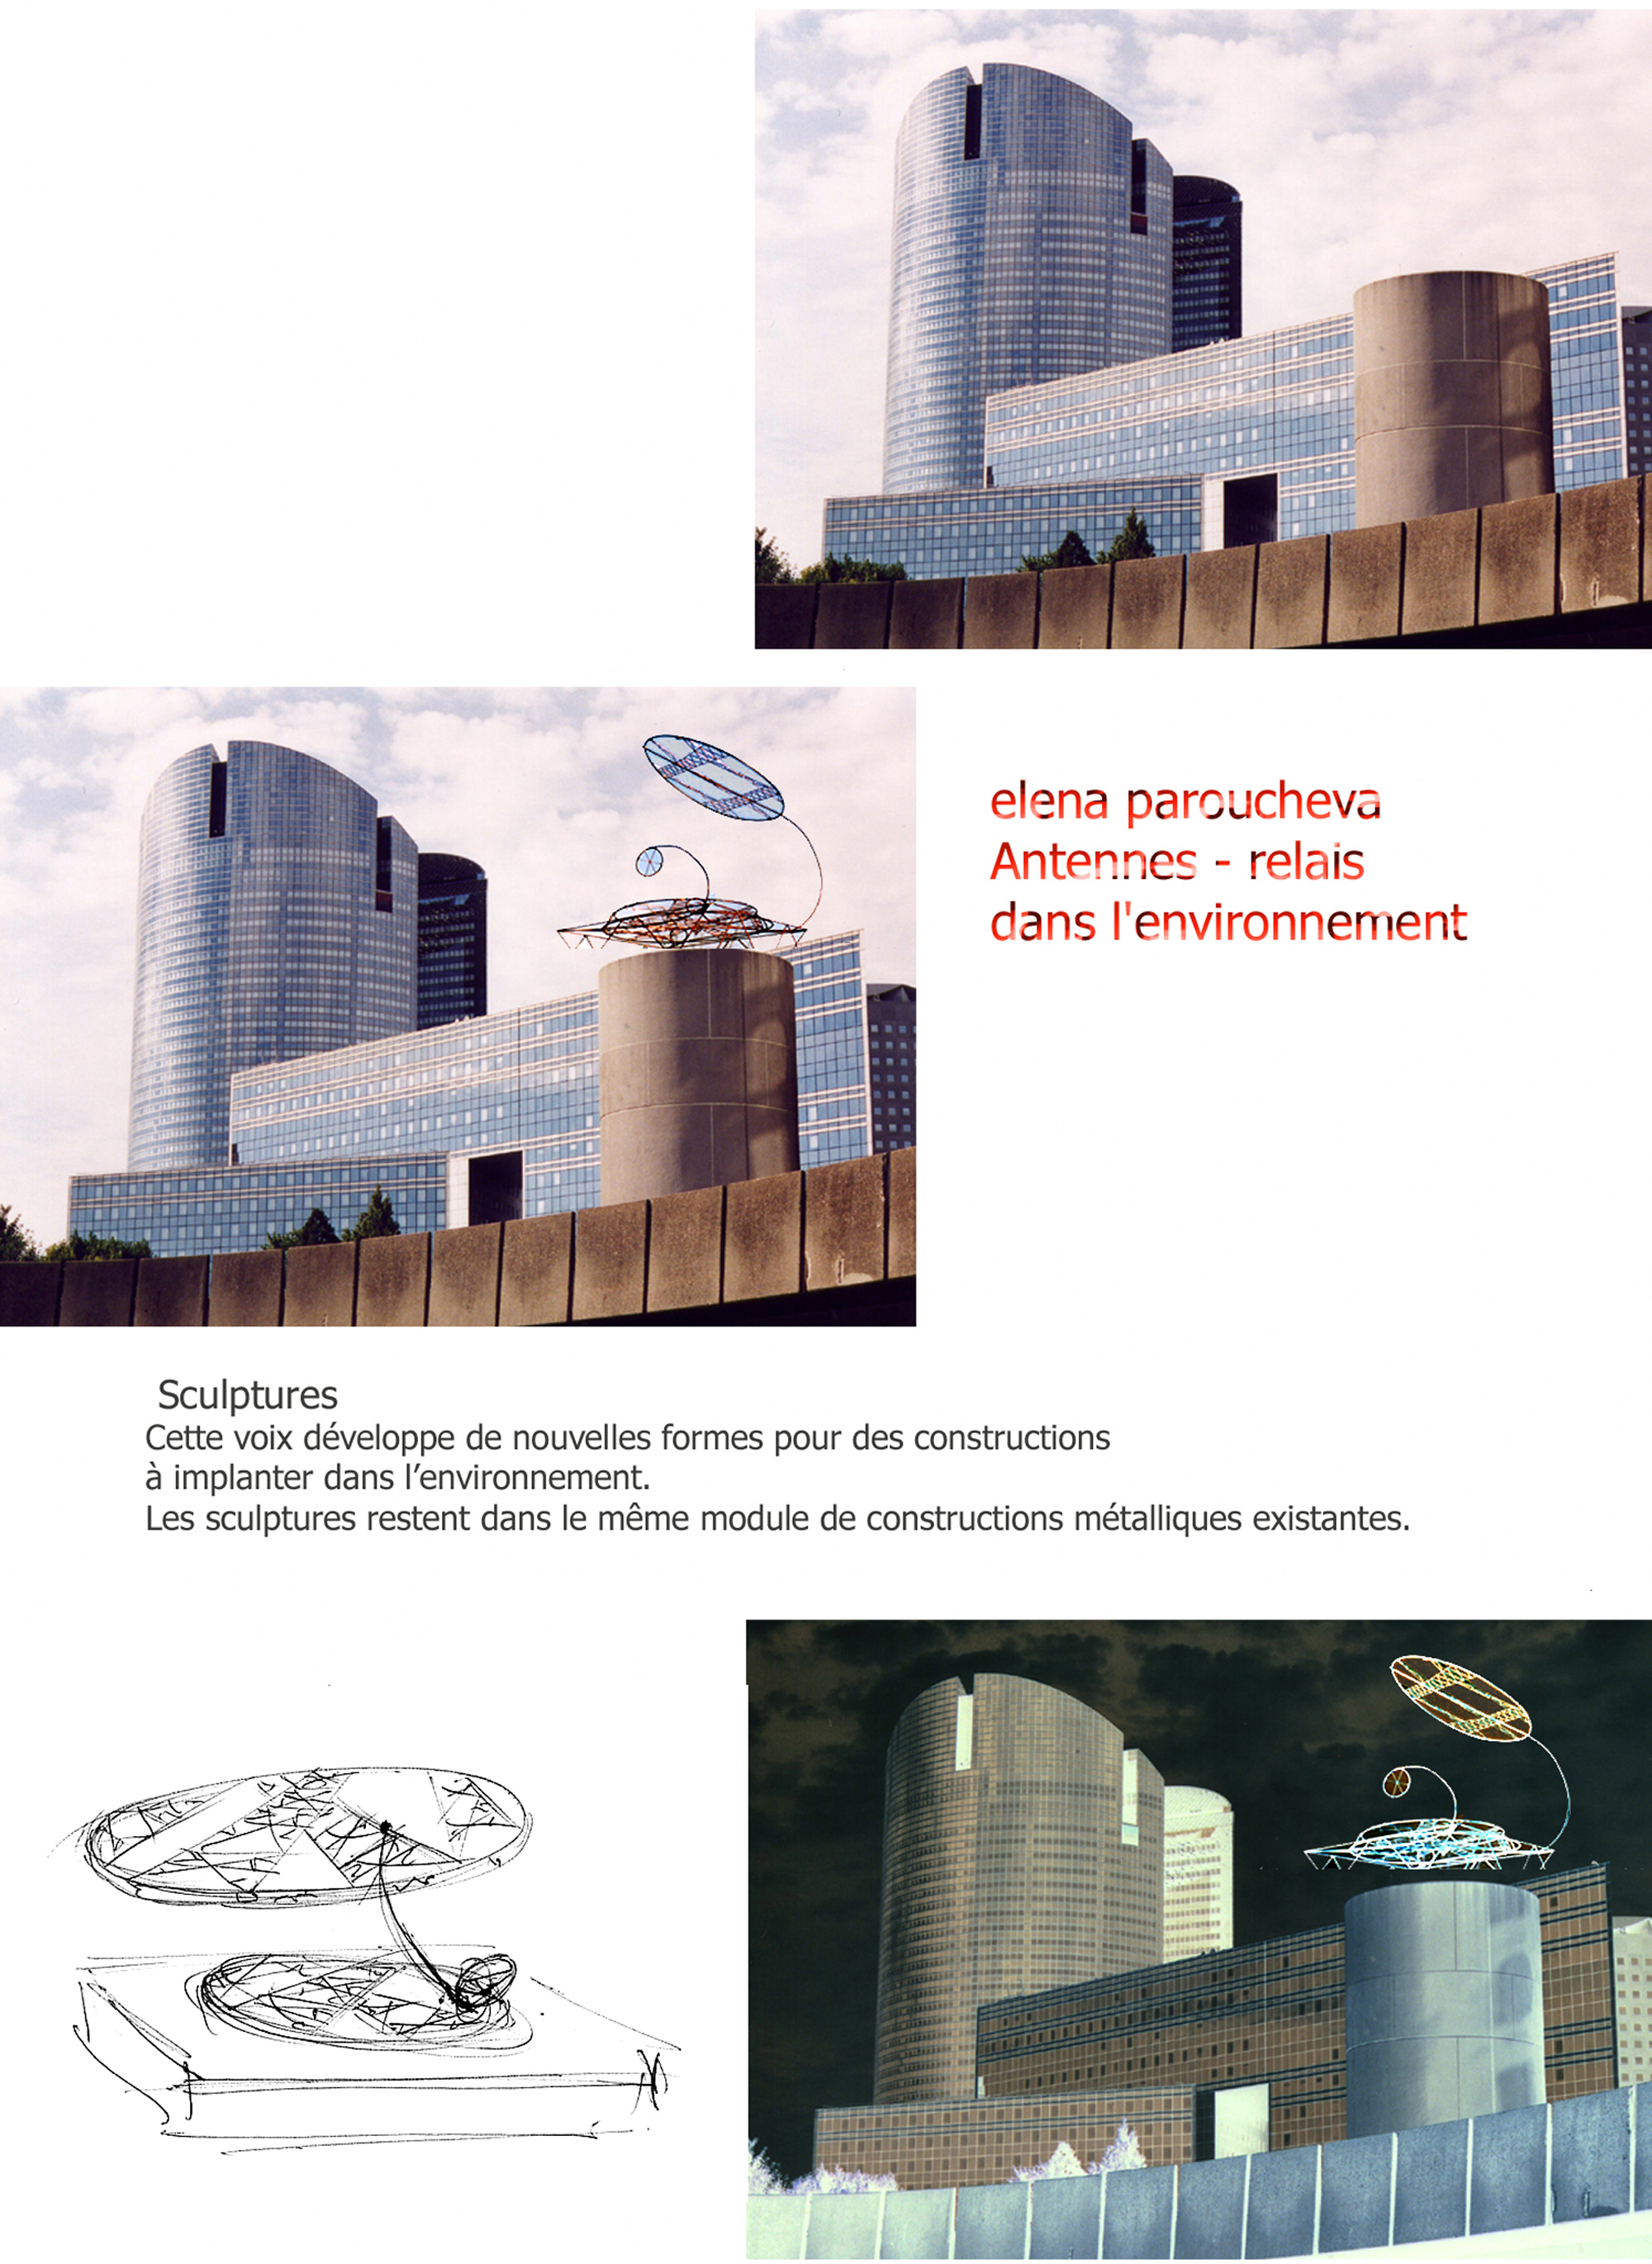 Telecom towers, projects